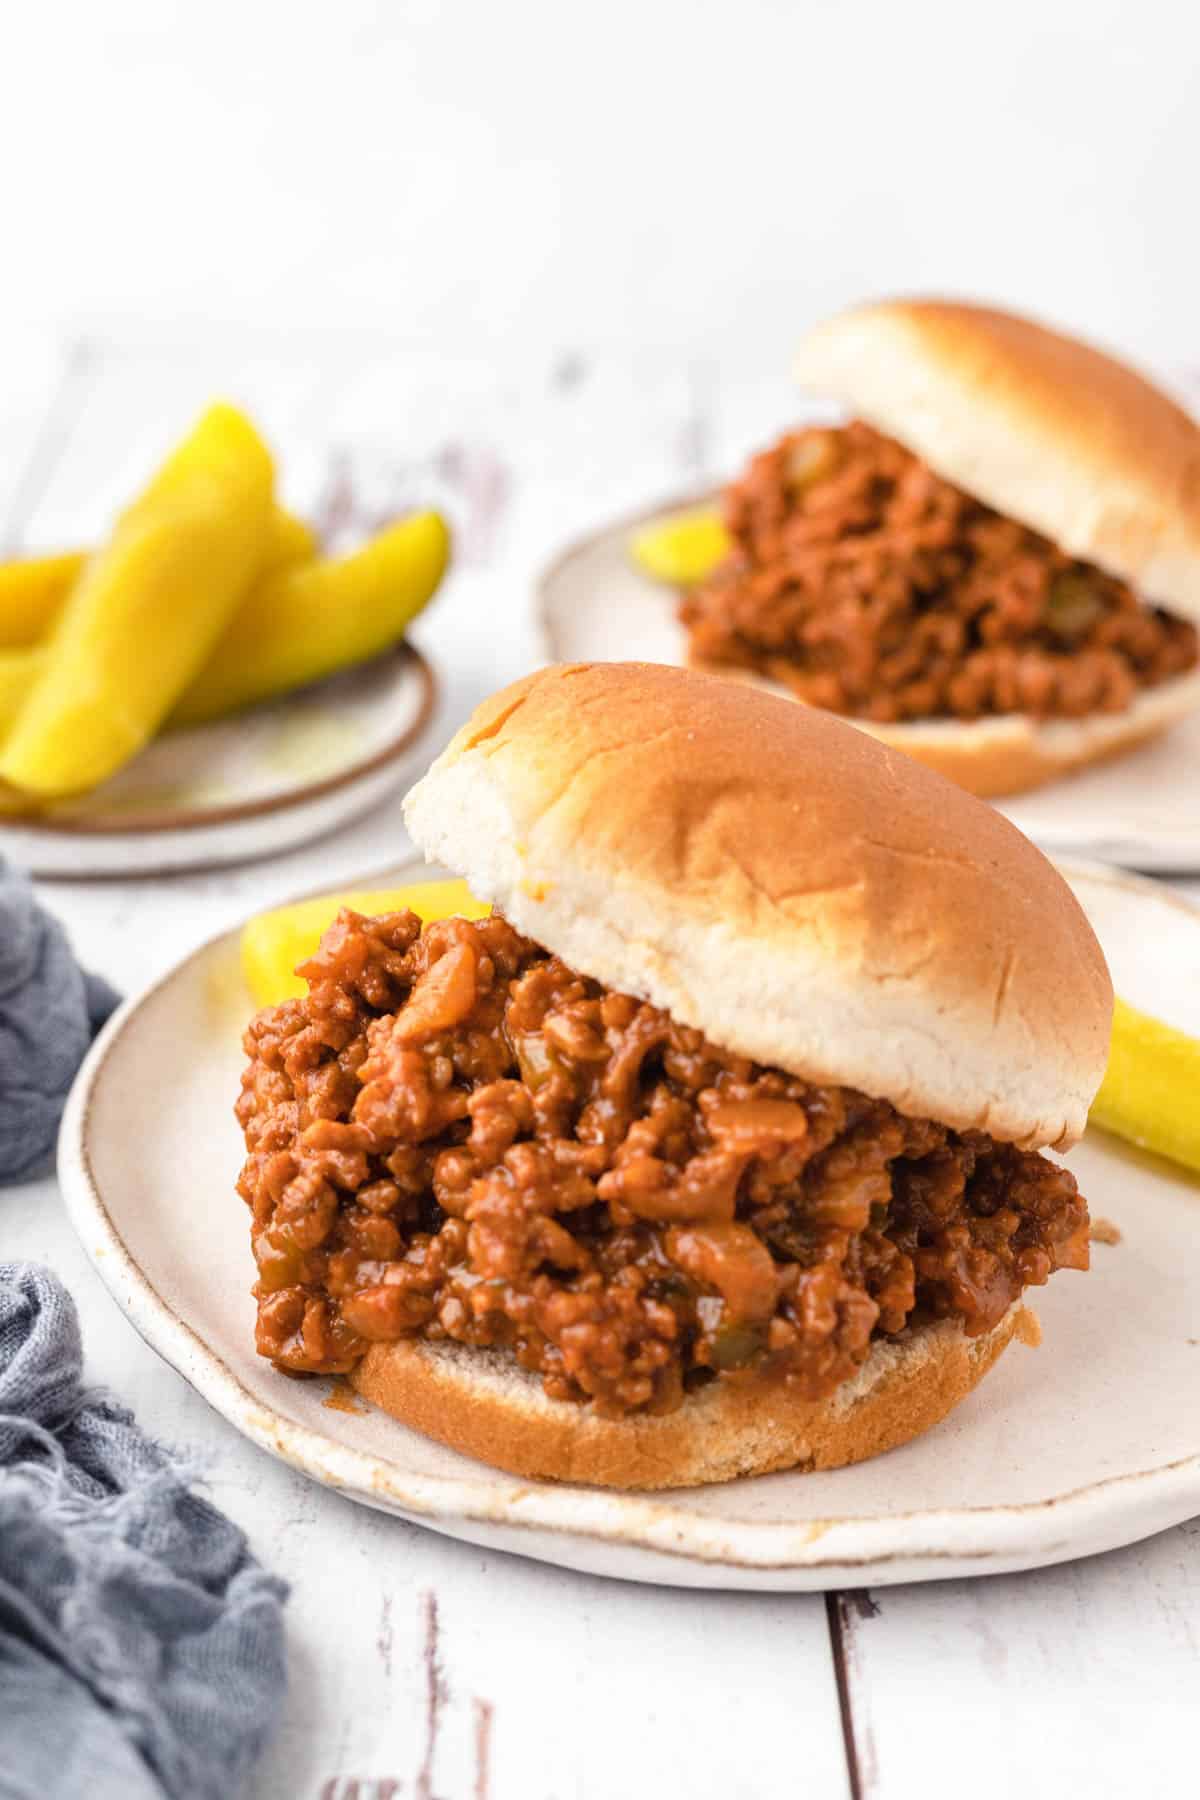 Seasoned homemade Sloppy Joes hamburger meat between two buns in the foreground. A side of pickles and a second Sloppy Joes burger in the background. 